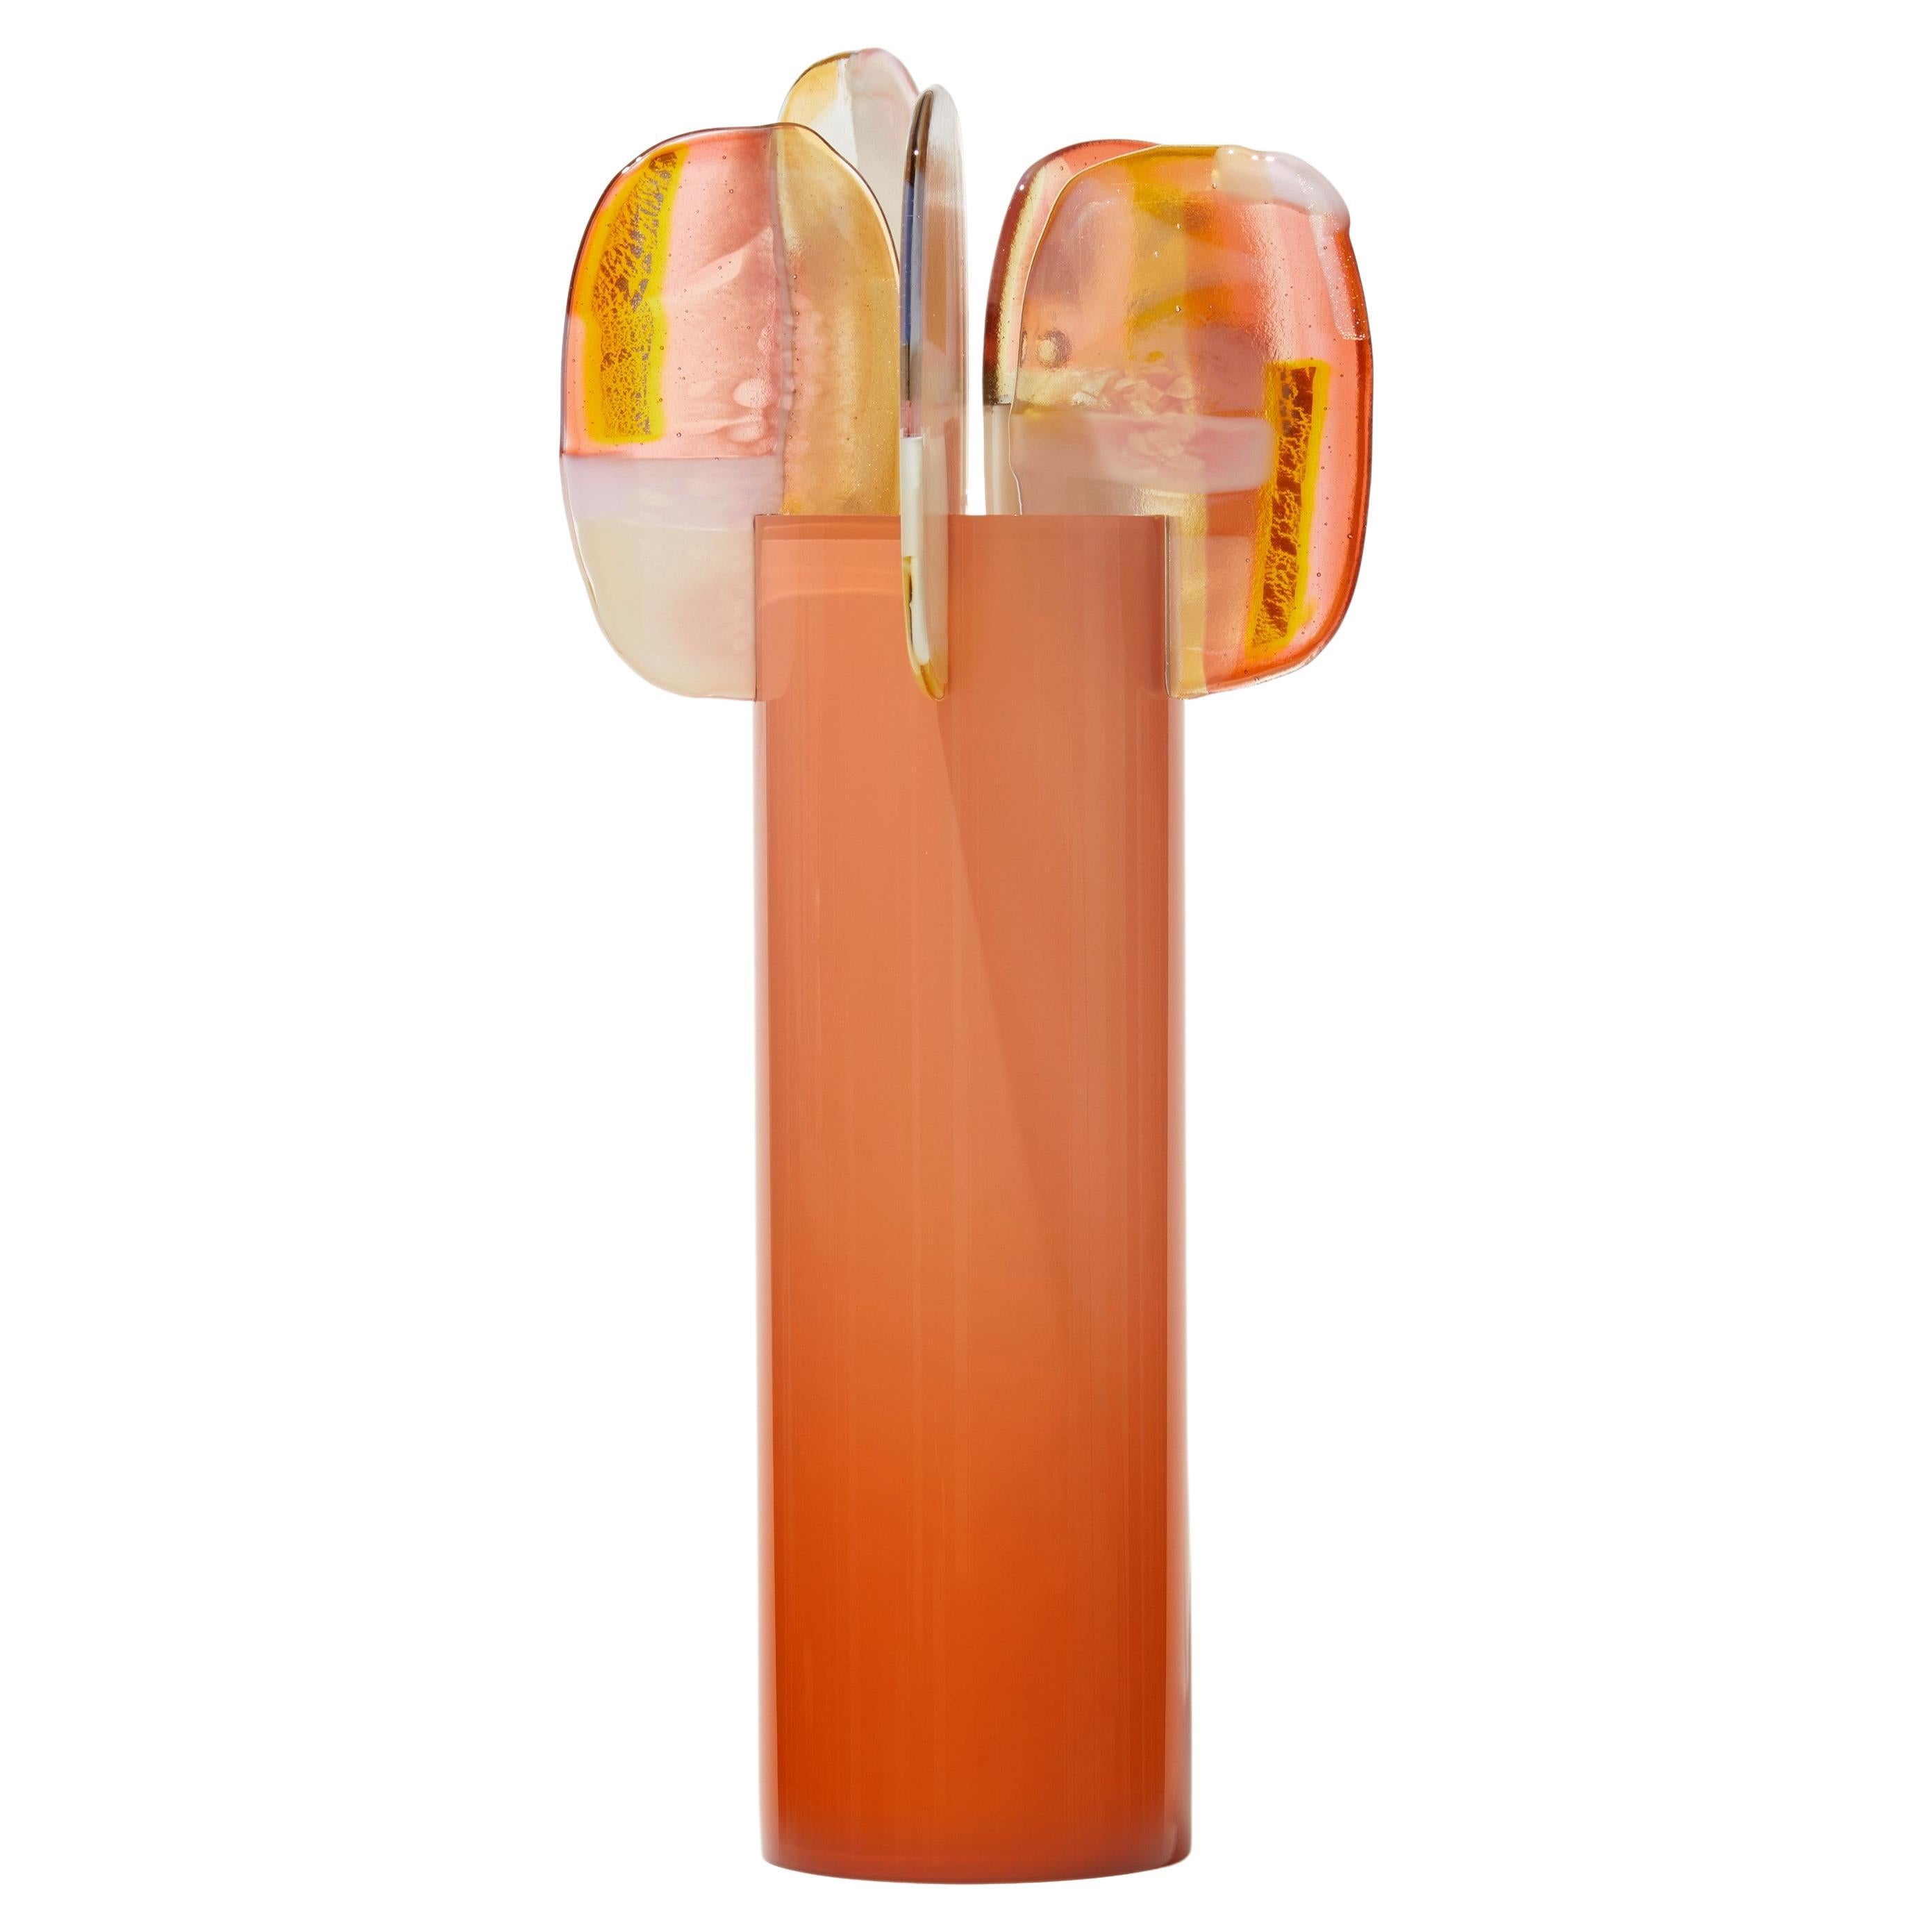 Paradise 06 in Orange Opal, Peach, Pink & Gold Glass Sculpture by Amy Cushing